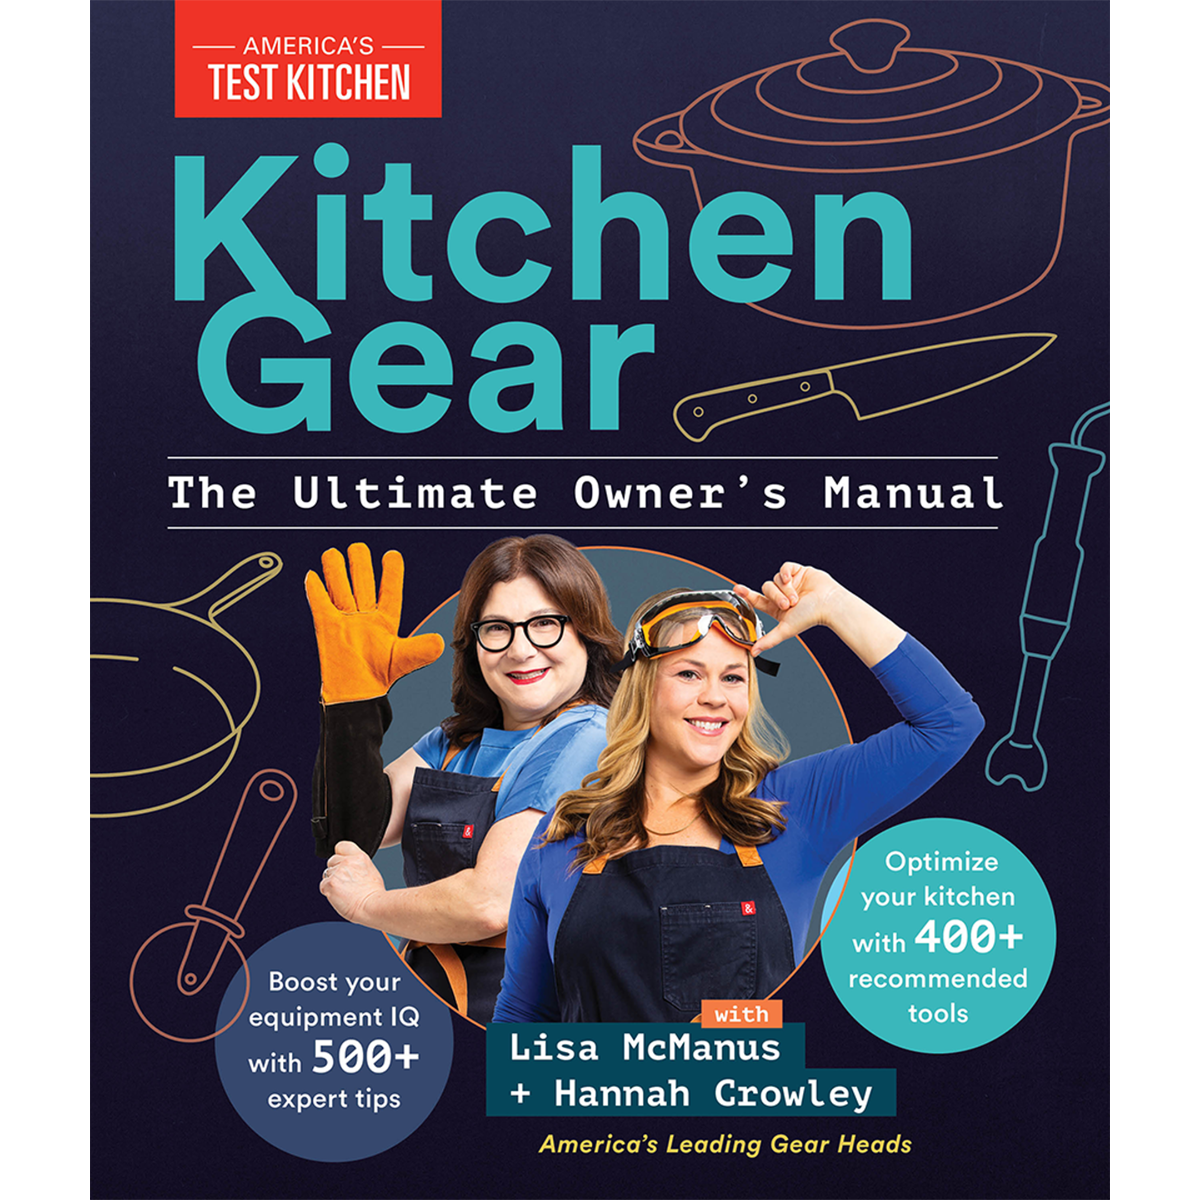 Owners Manual by Lisa McManus and Hannah Crowley-Just released on Amazon